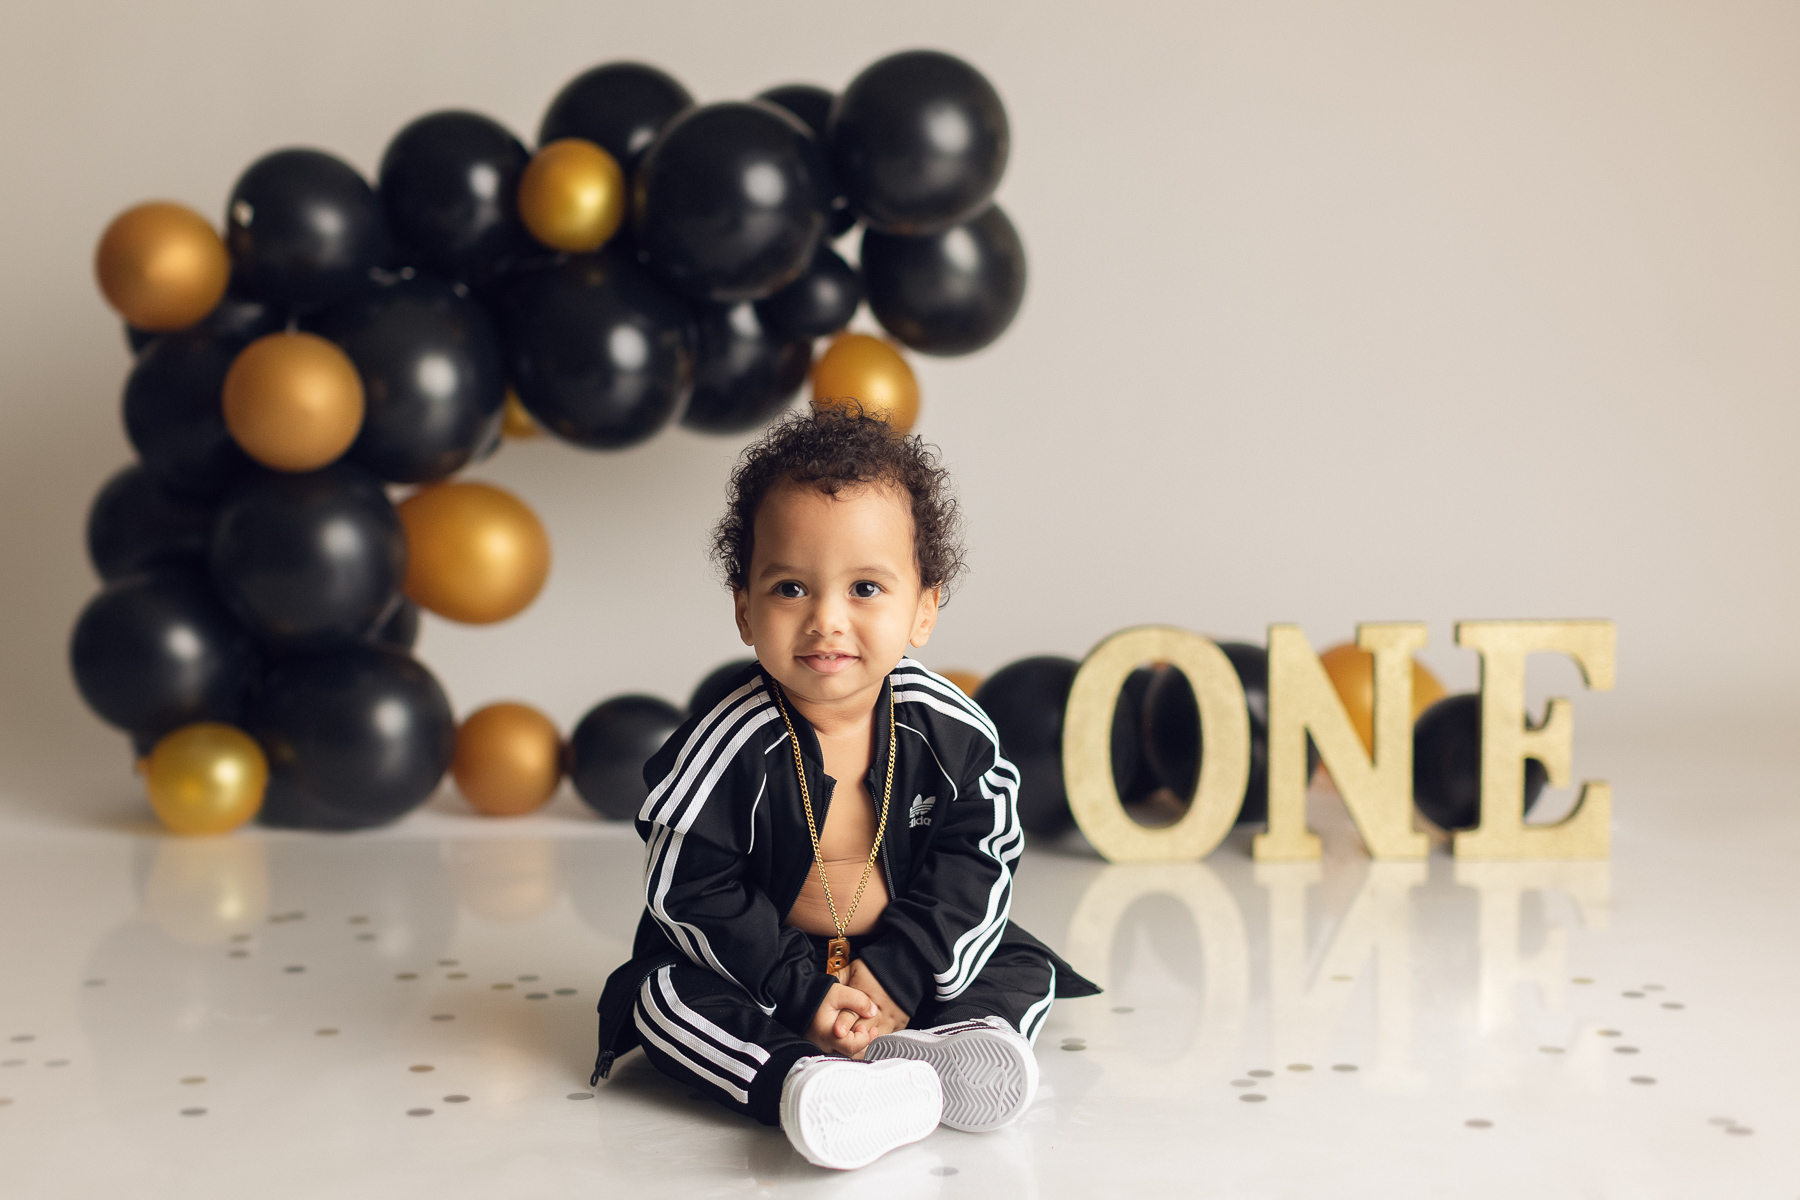 Cake smash photography Theme and preparation - black and gold - baby boy - best cake smash photographer in Vancouver